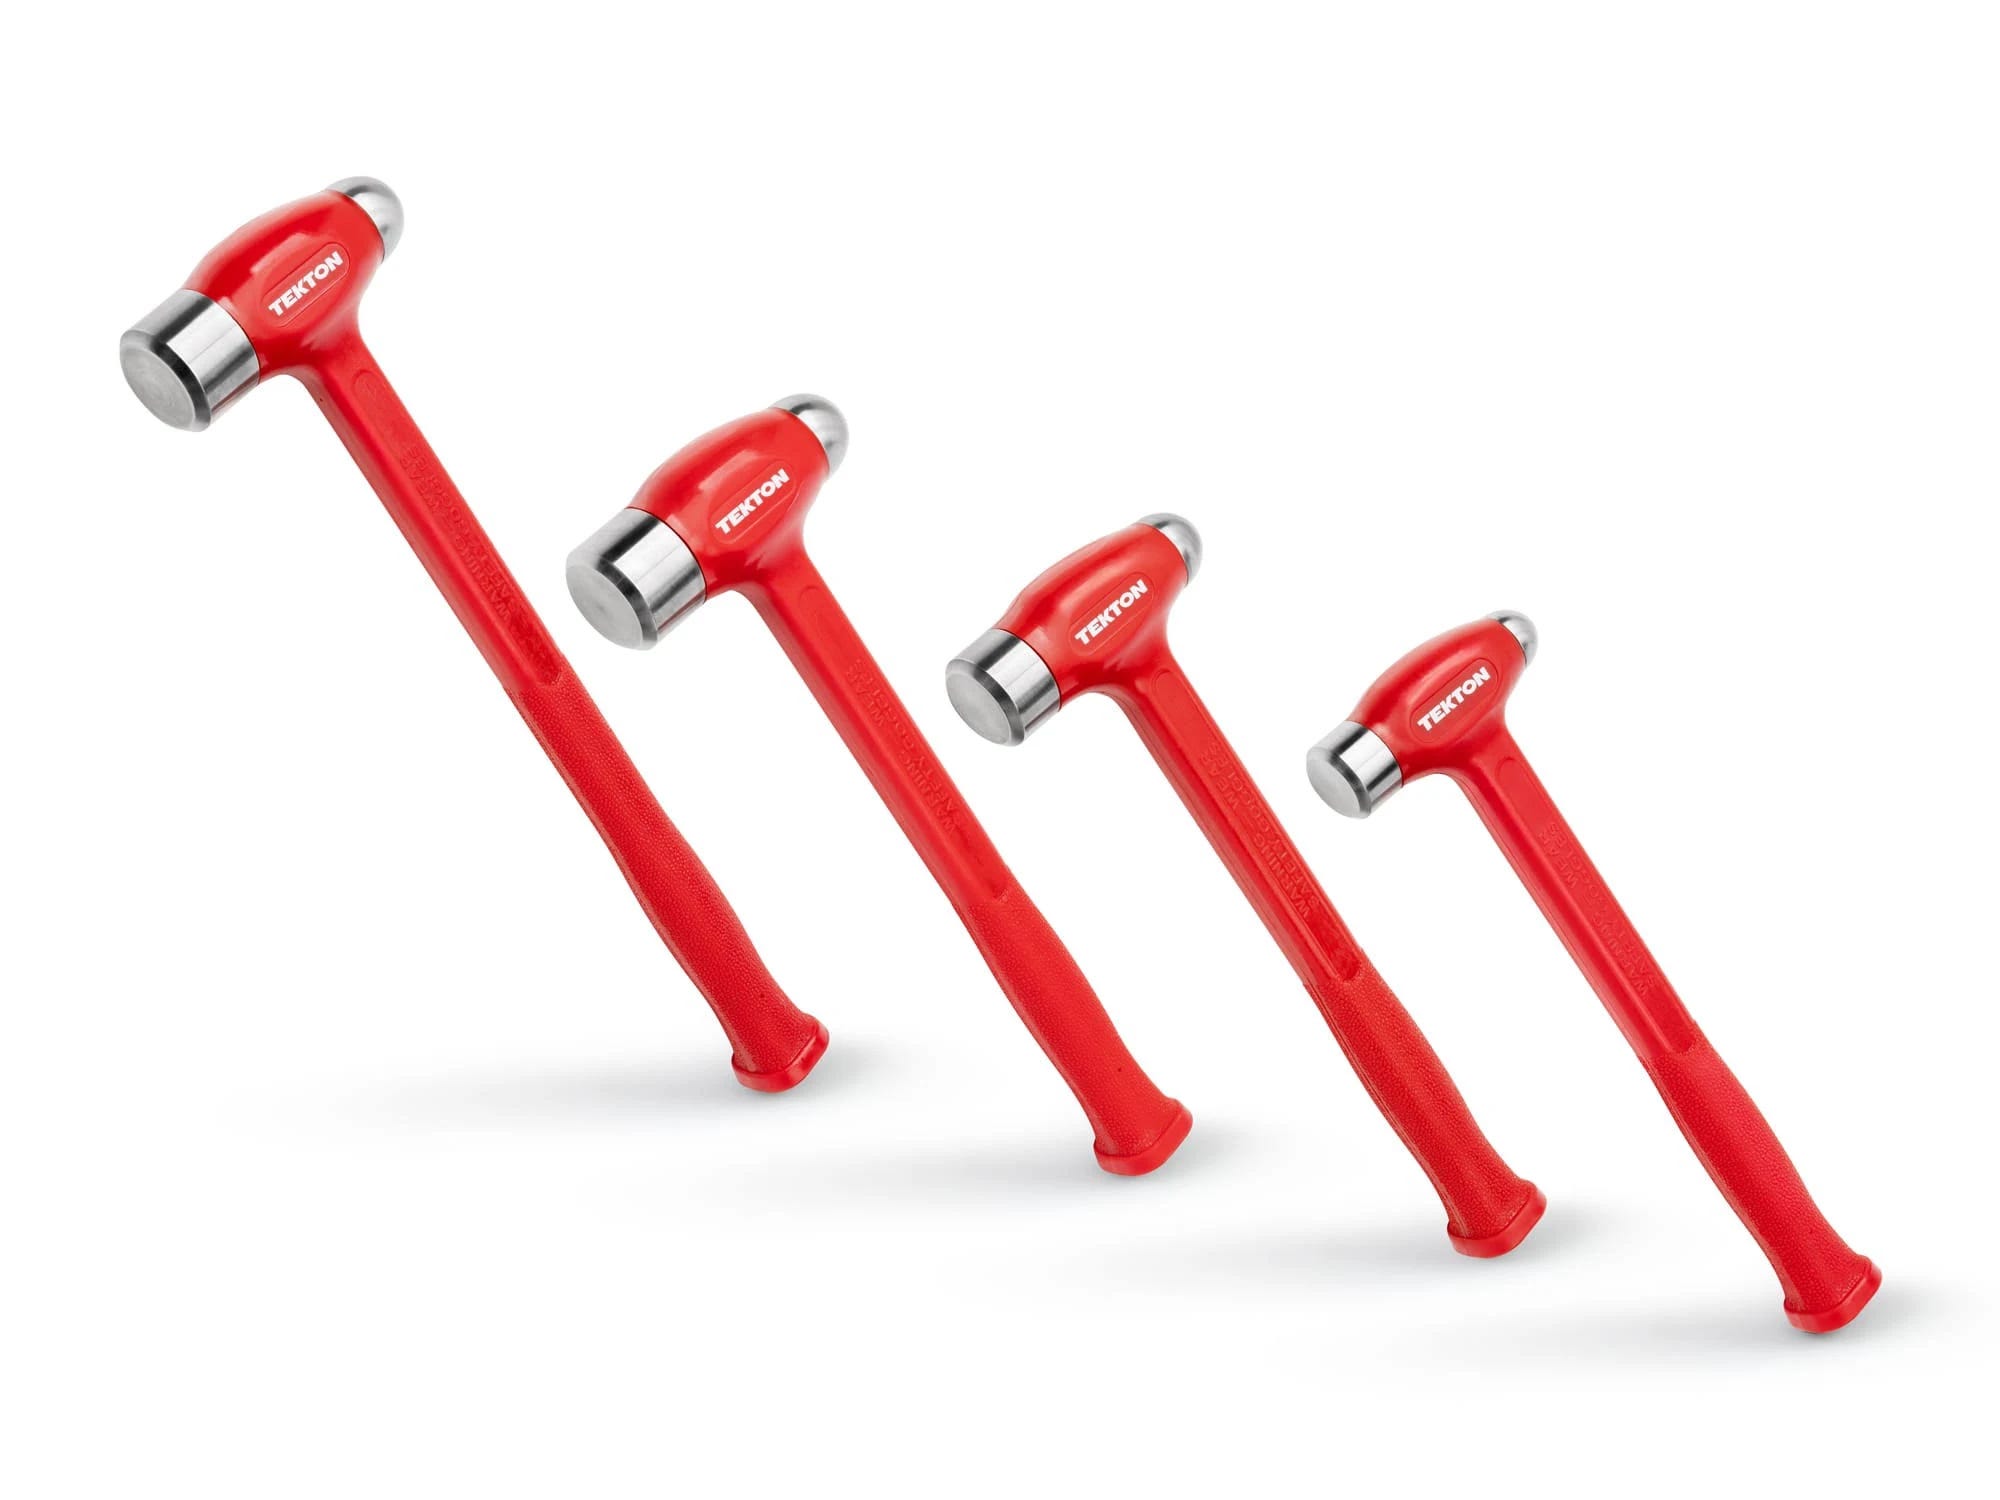 TEKTON 4-Piece Dead Blow Hammer Set with Smooth and Ball Peen Heads | Image